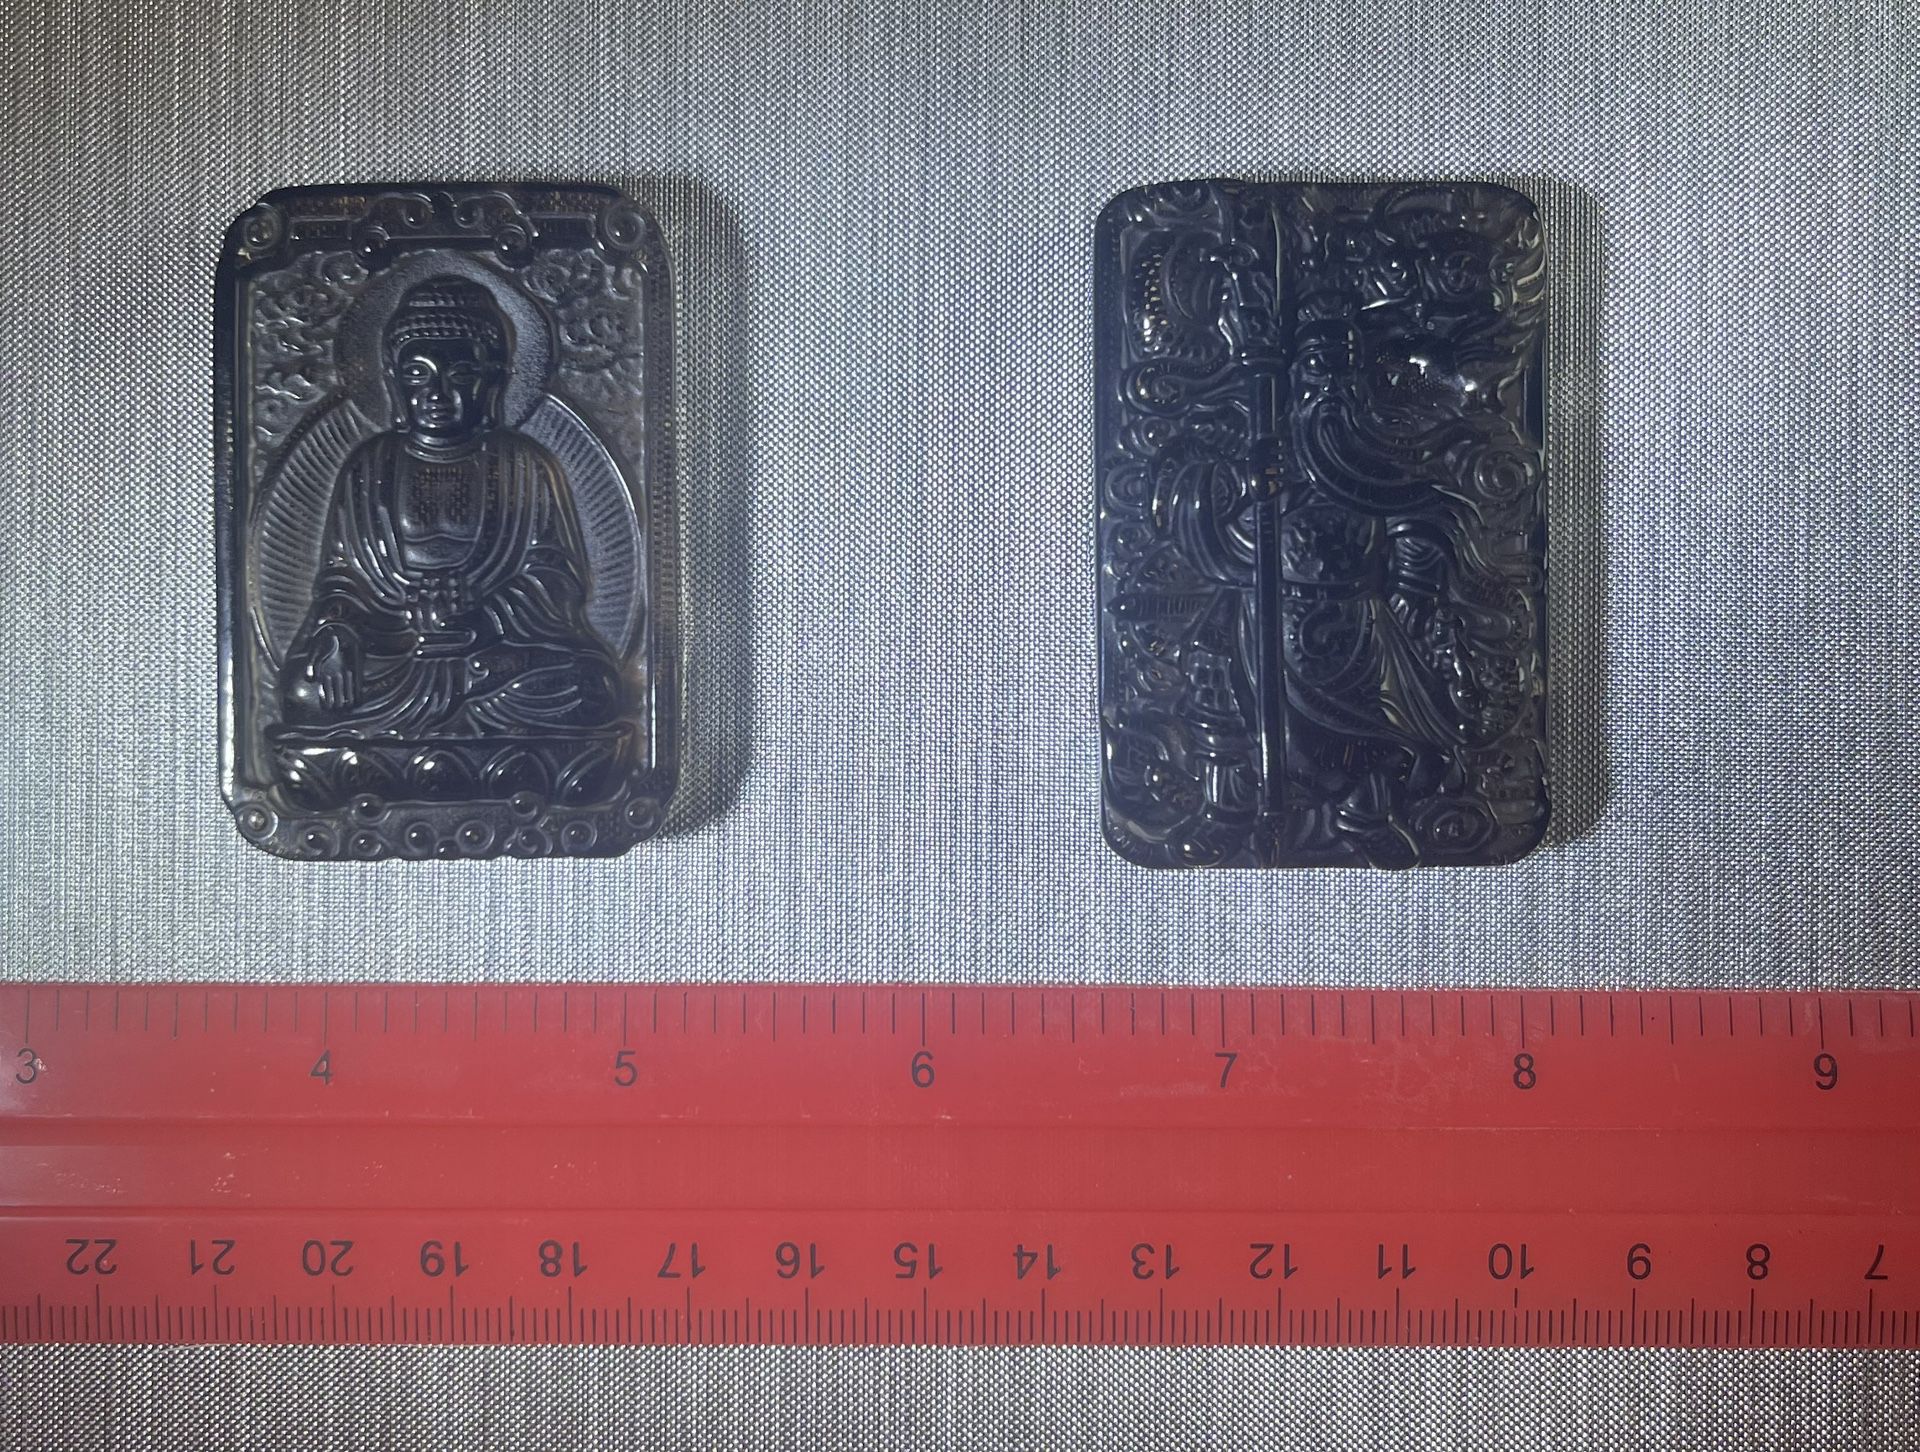 2 Square Buddha Carvings. Gorgeous Details. Could be diy to Pendants.